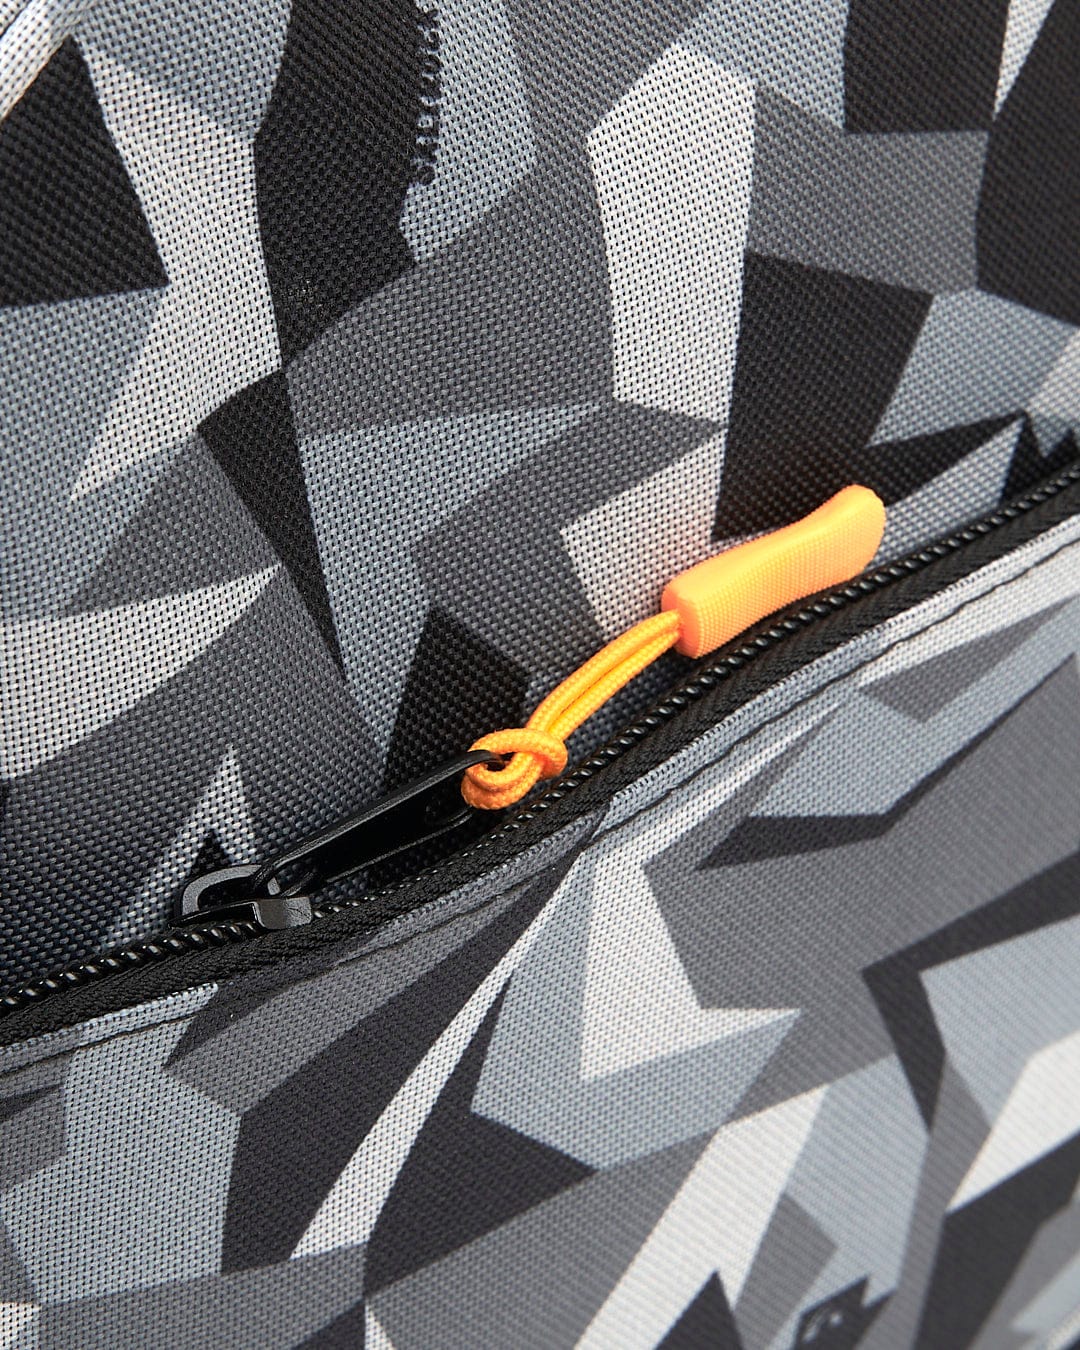 The zipper of a Saltrock Camo Balboa - Hold-All Bag - Dark Grey with a camouflage pattern.